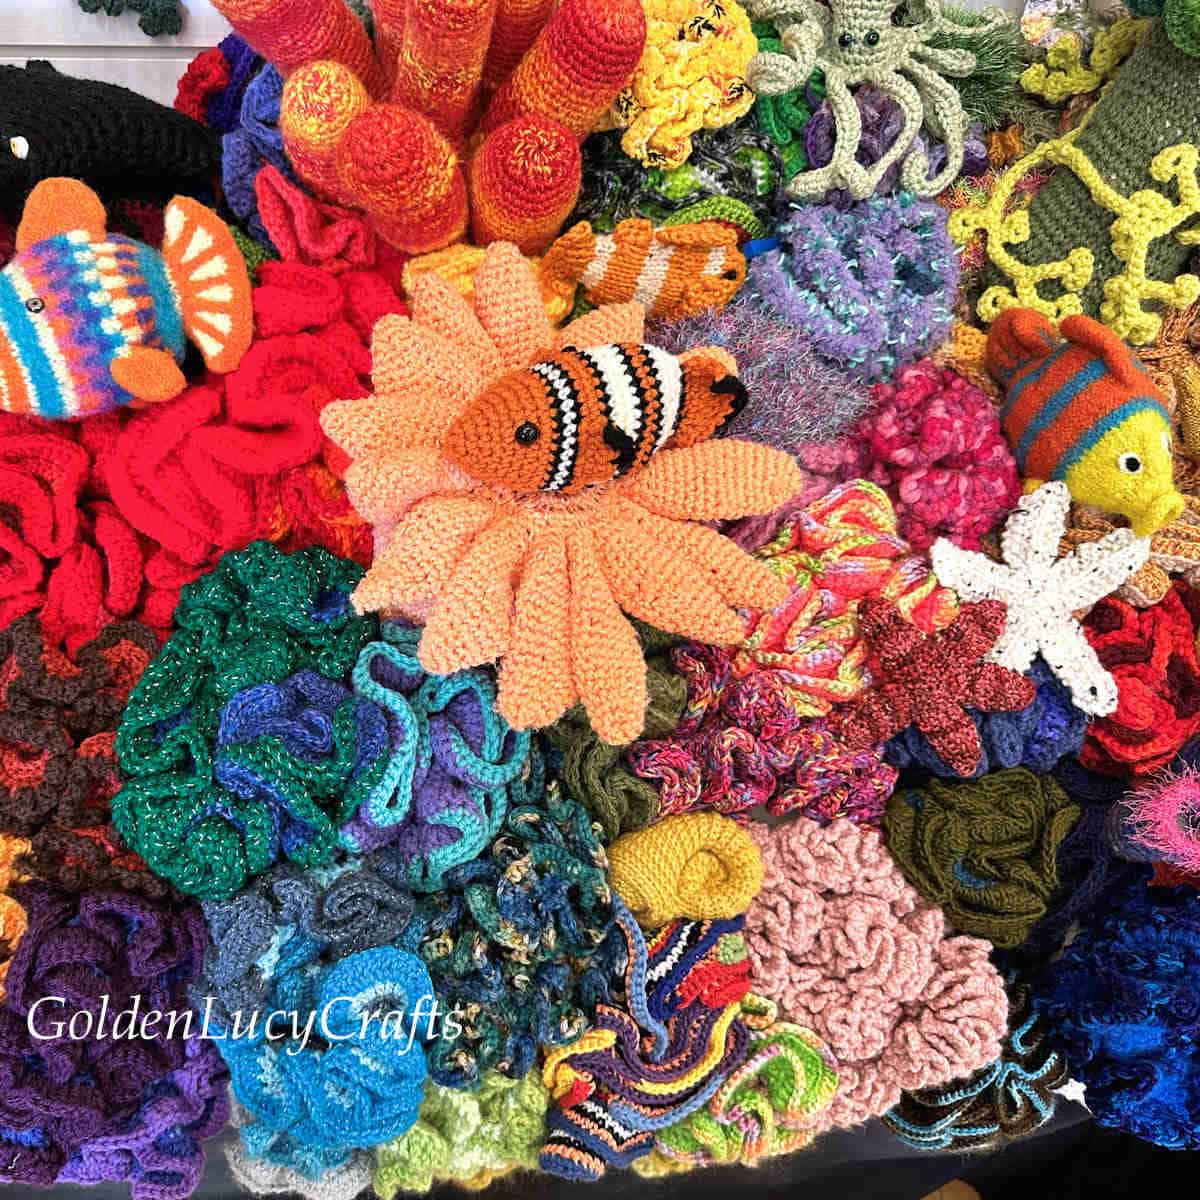 Crochet hyprbolic corals and fish.